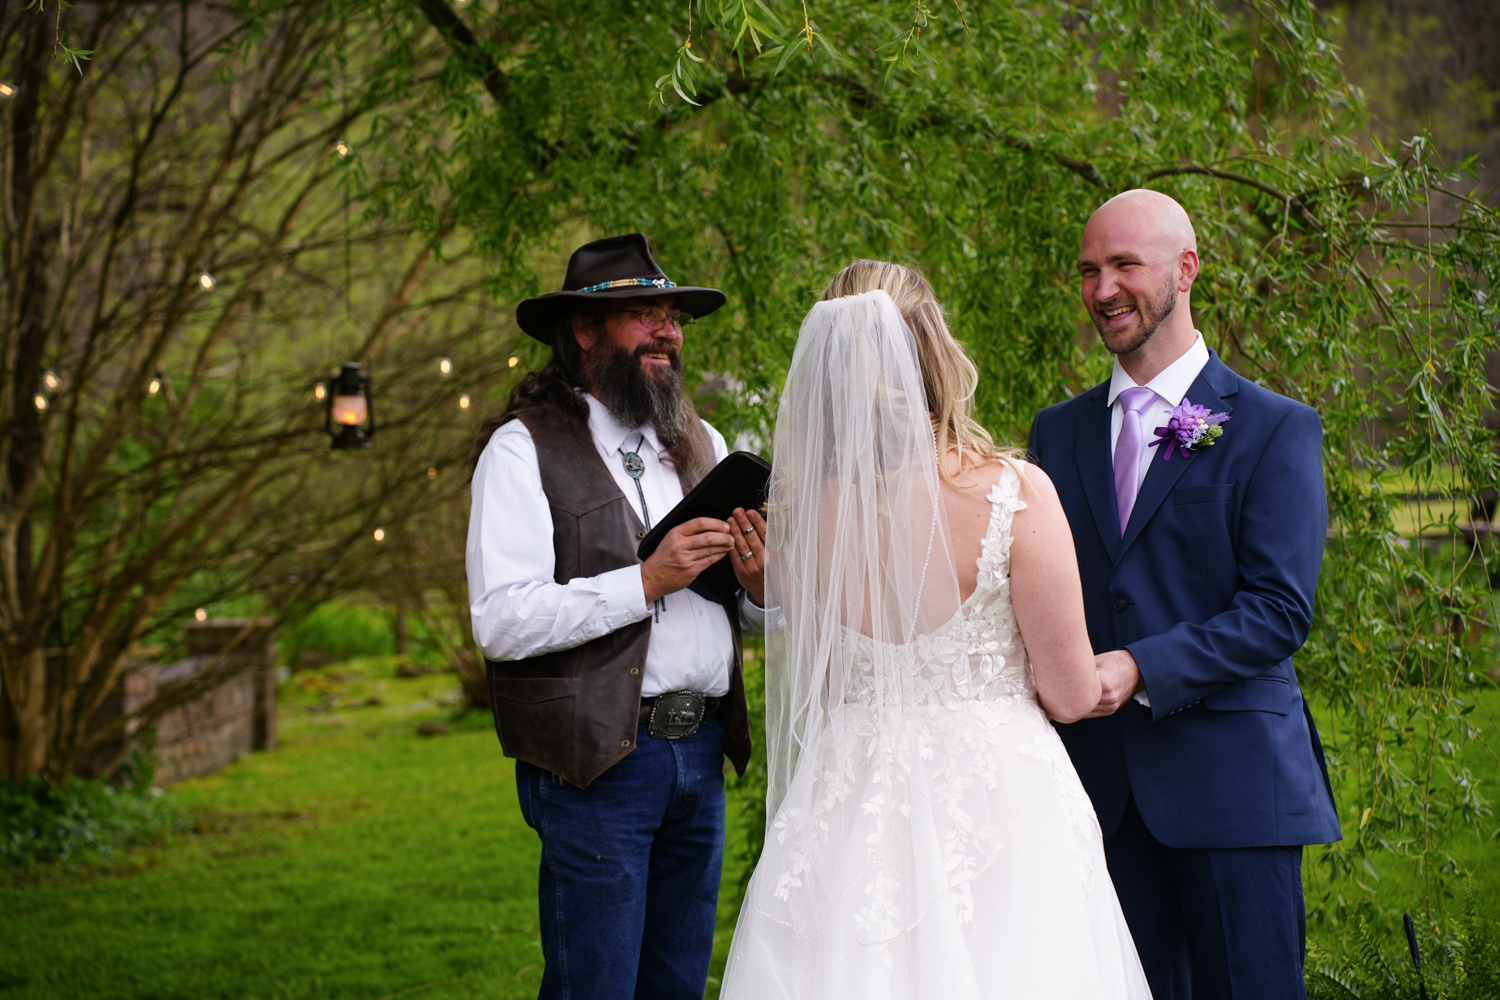 Preacher in a black hat and mountain vest performing a ceremony under a willow tree in early spring while the groom smiles at his bride